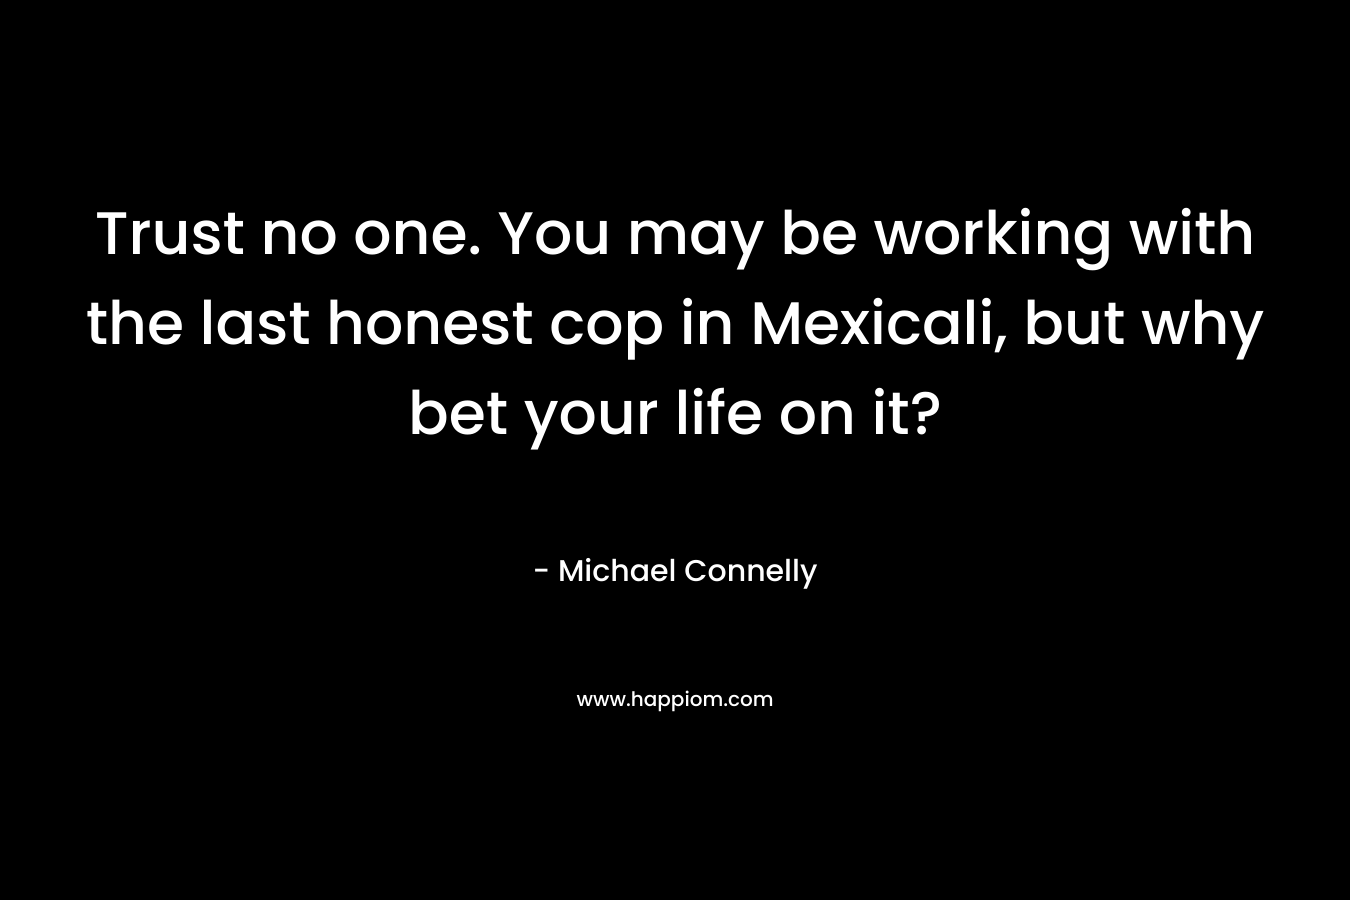 Trust no one. You may be working with the last honest cop in Mexicali, but why bet your life on it? – Michael Connelly